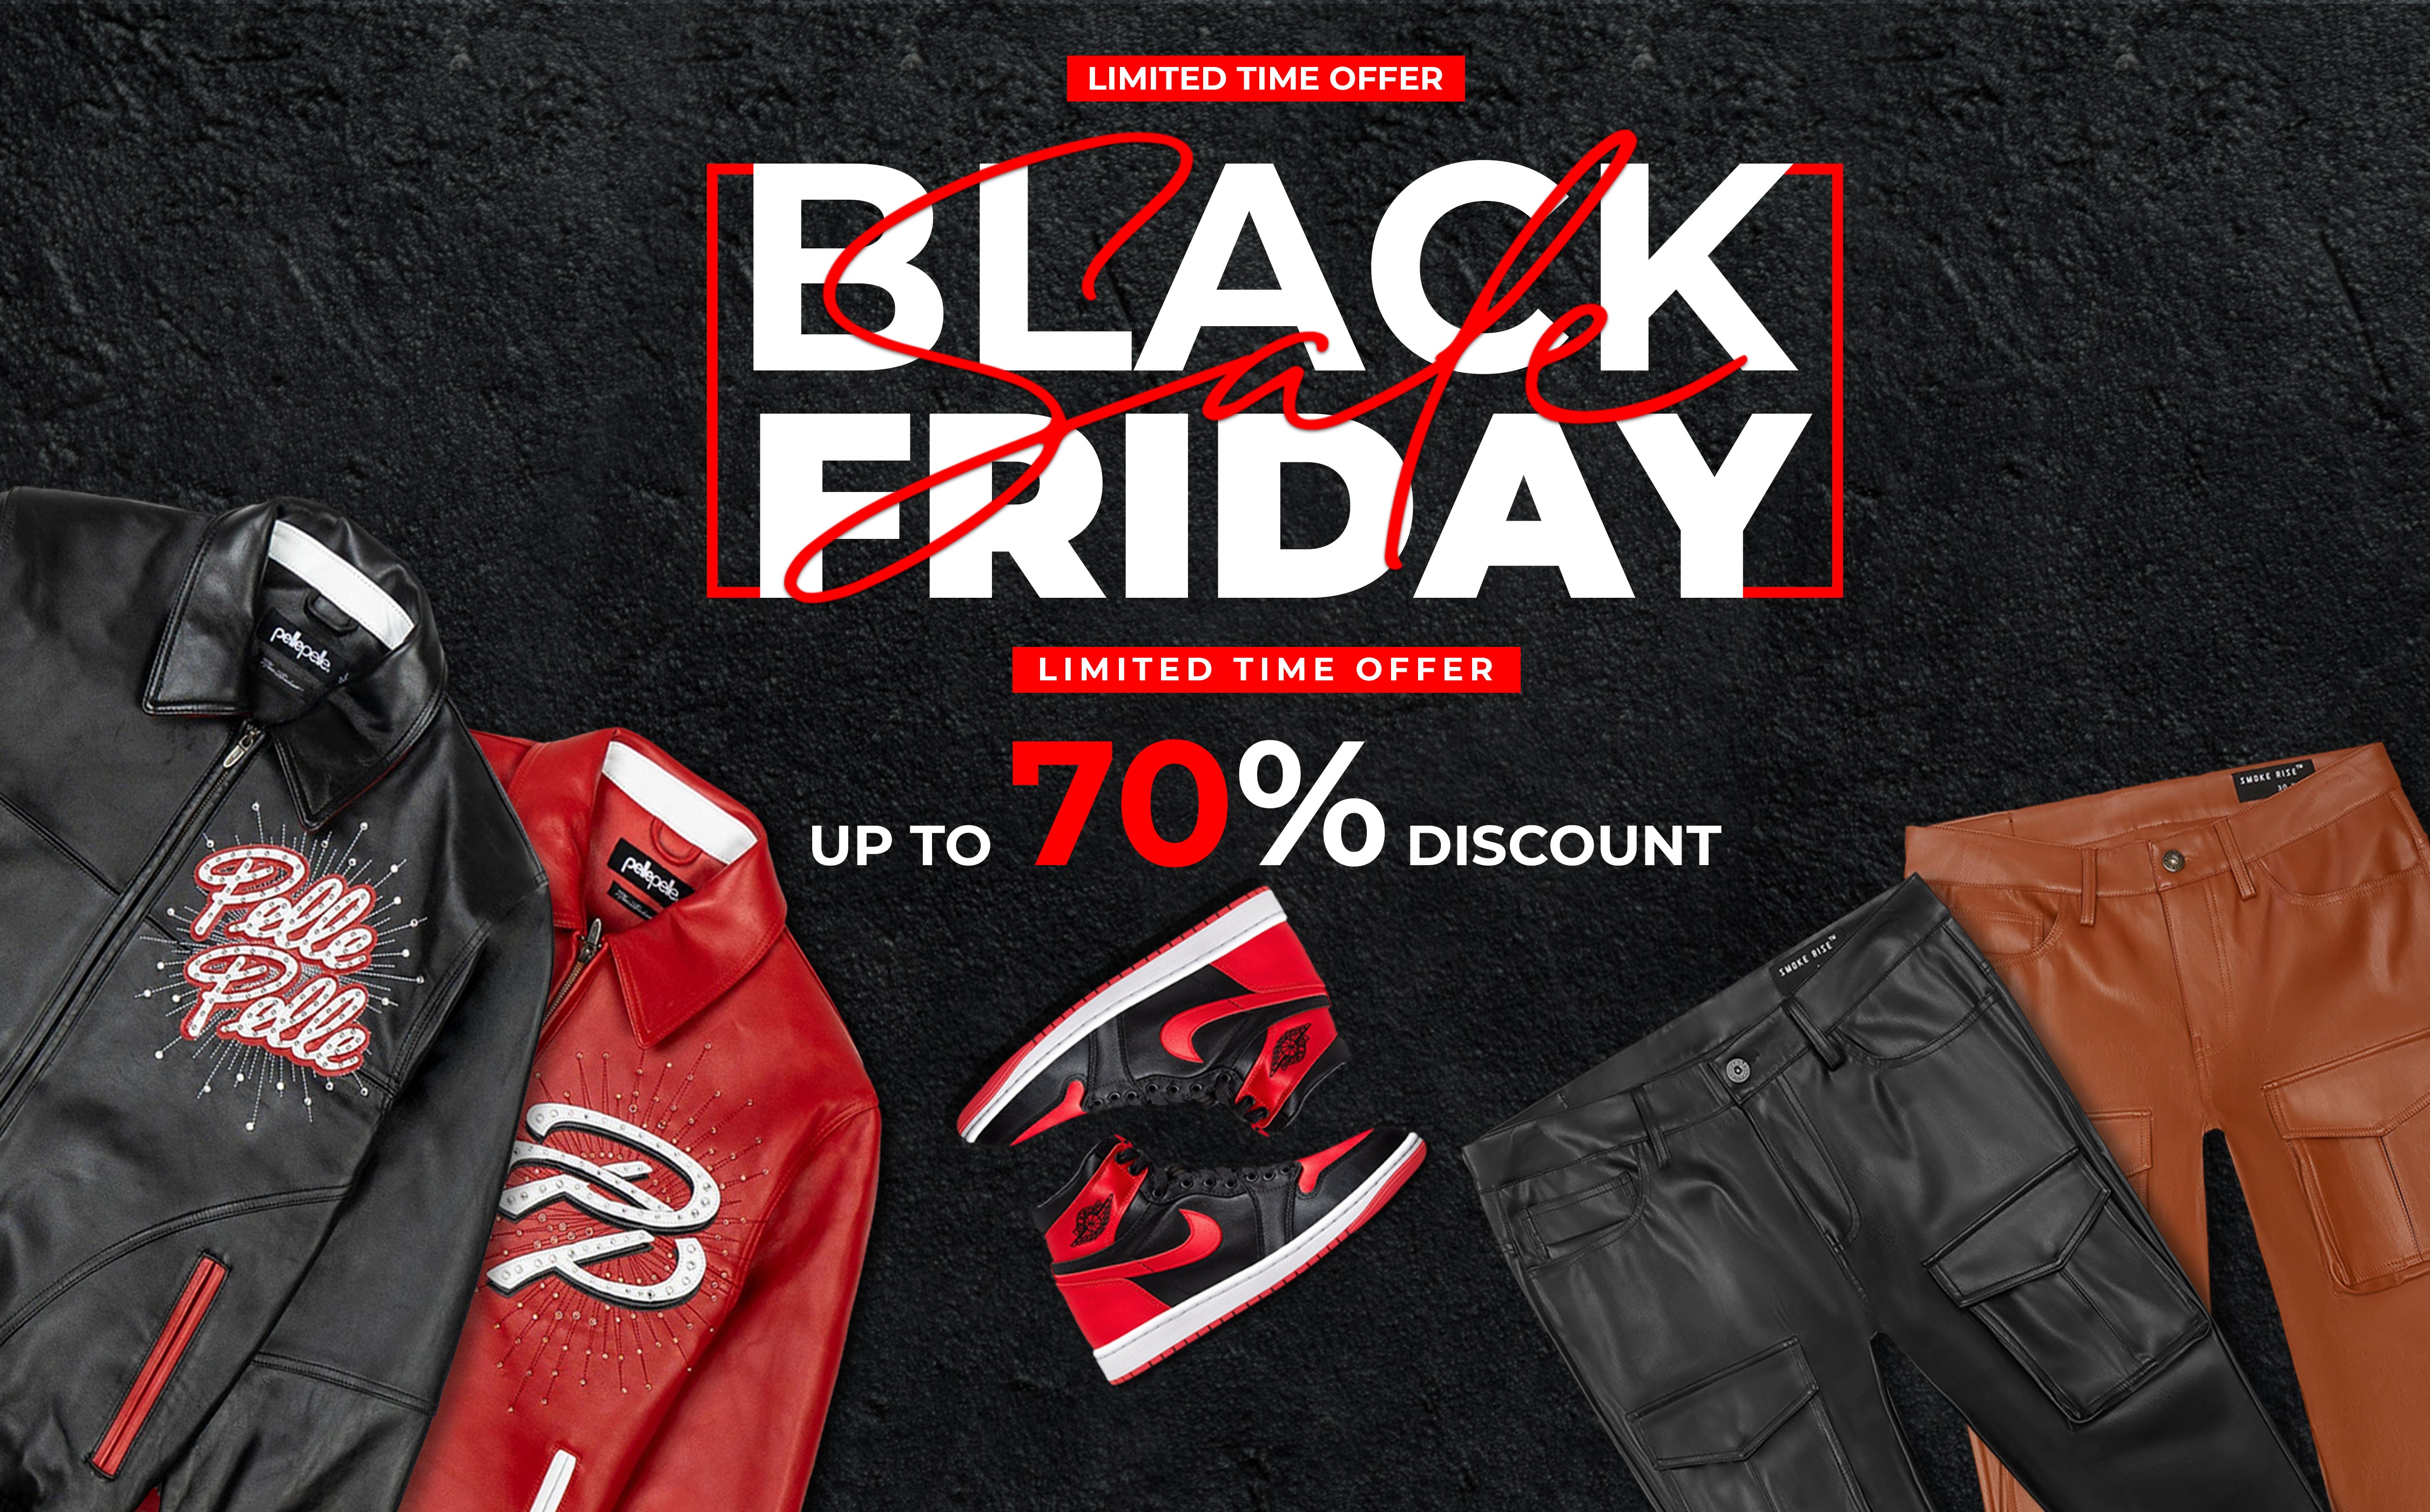 Get Ready to Slay Black Friday with Tops & Bottoms USA's Hottest Picks!